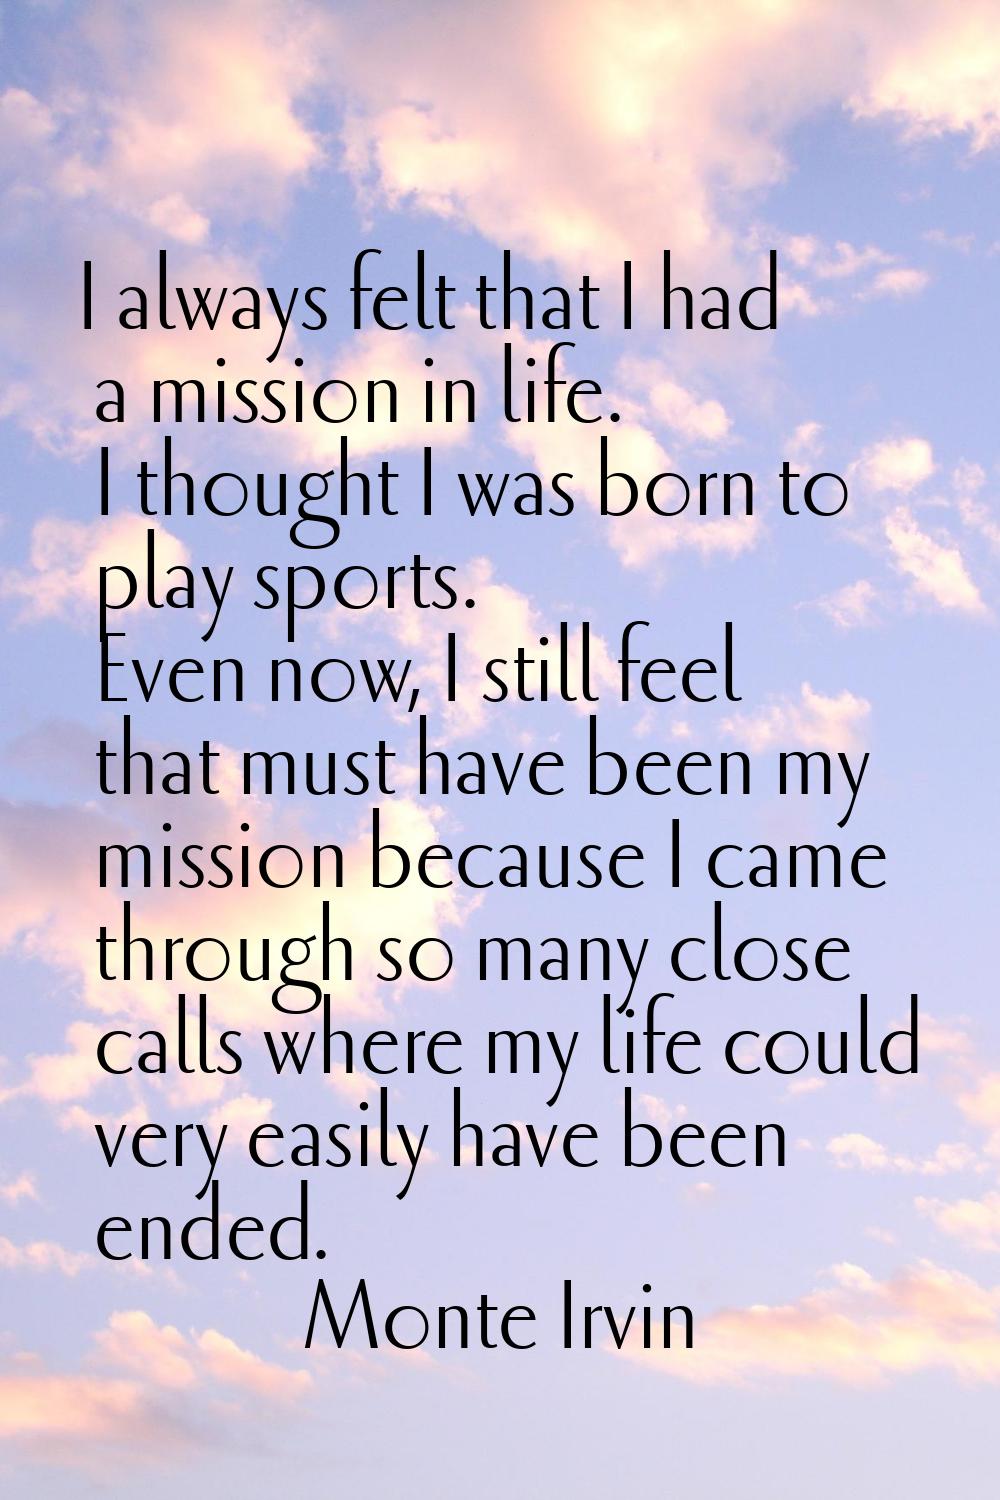 I always felt that I had a mission in life. I thought I was born to play sports. Even now, I still 